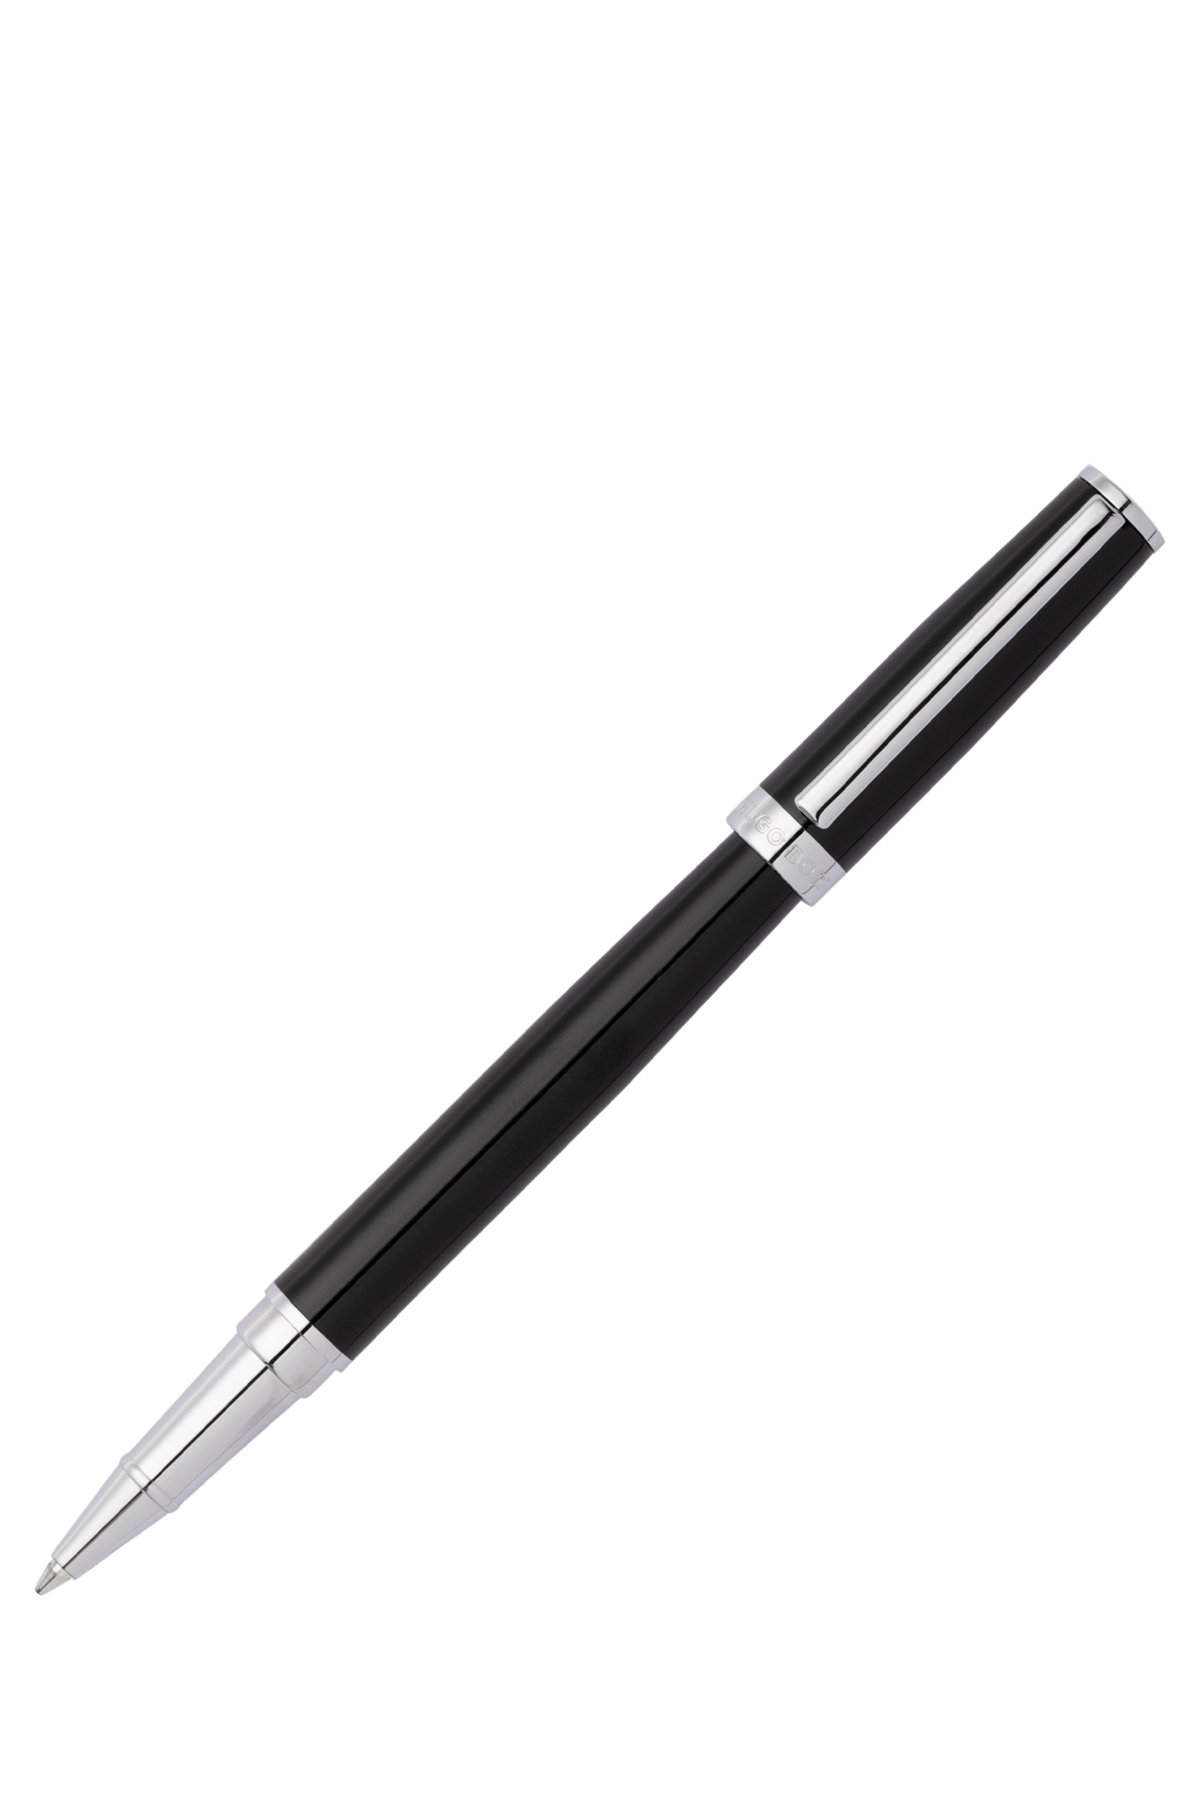 Glossy-black lacquer rollerball pen with logo ring, Black